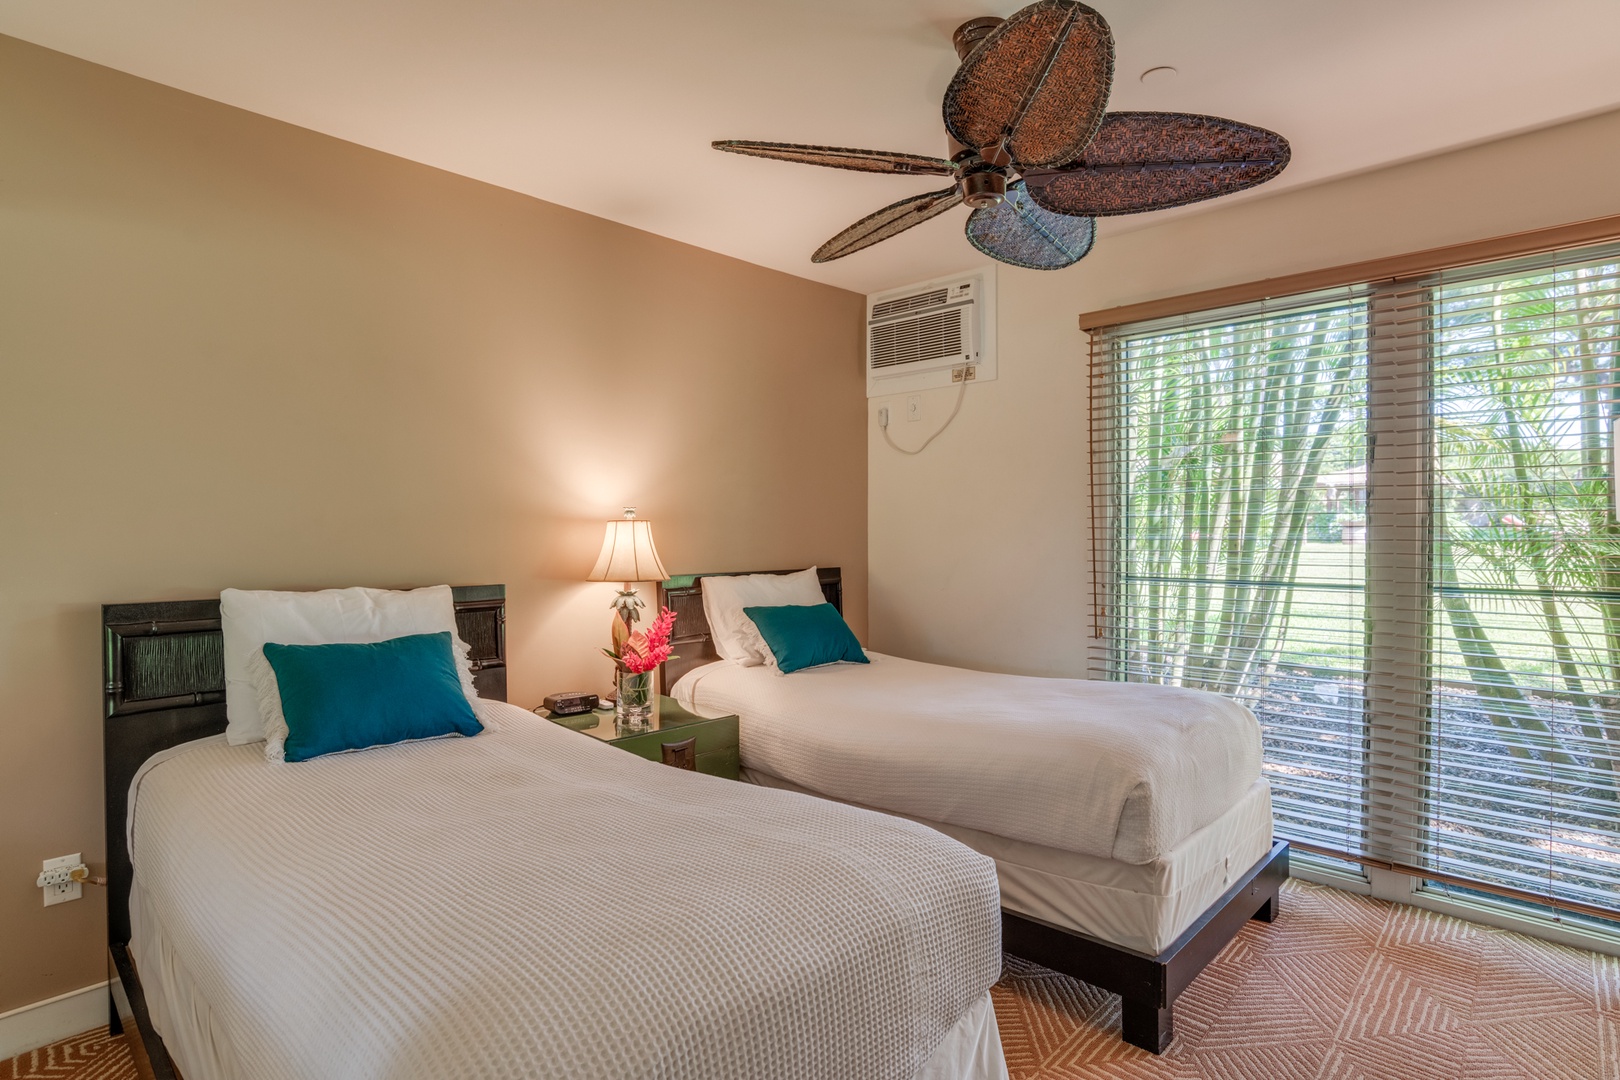 Lahaina Vacation Rentals, Aina Nalu D103 - Guest Bedroom 2 has 2 twin beds and a garden view